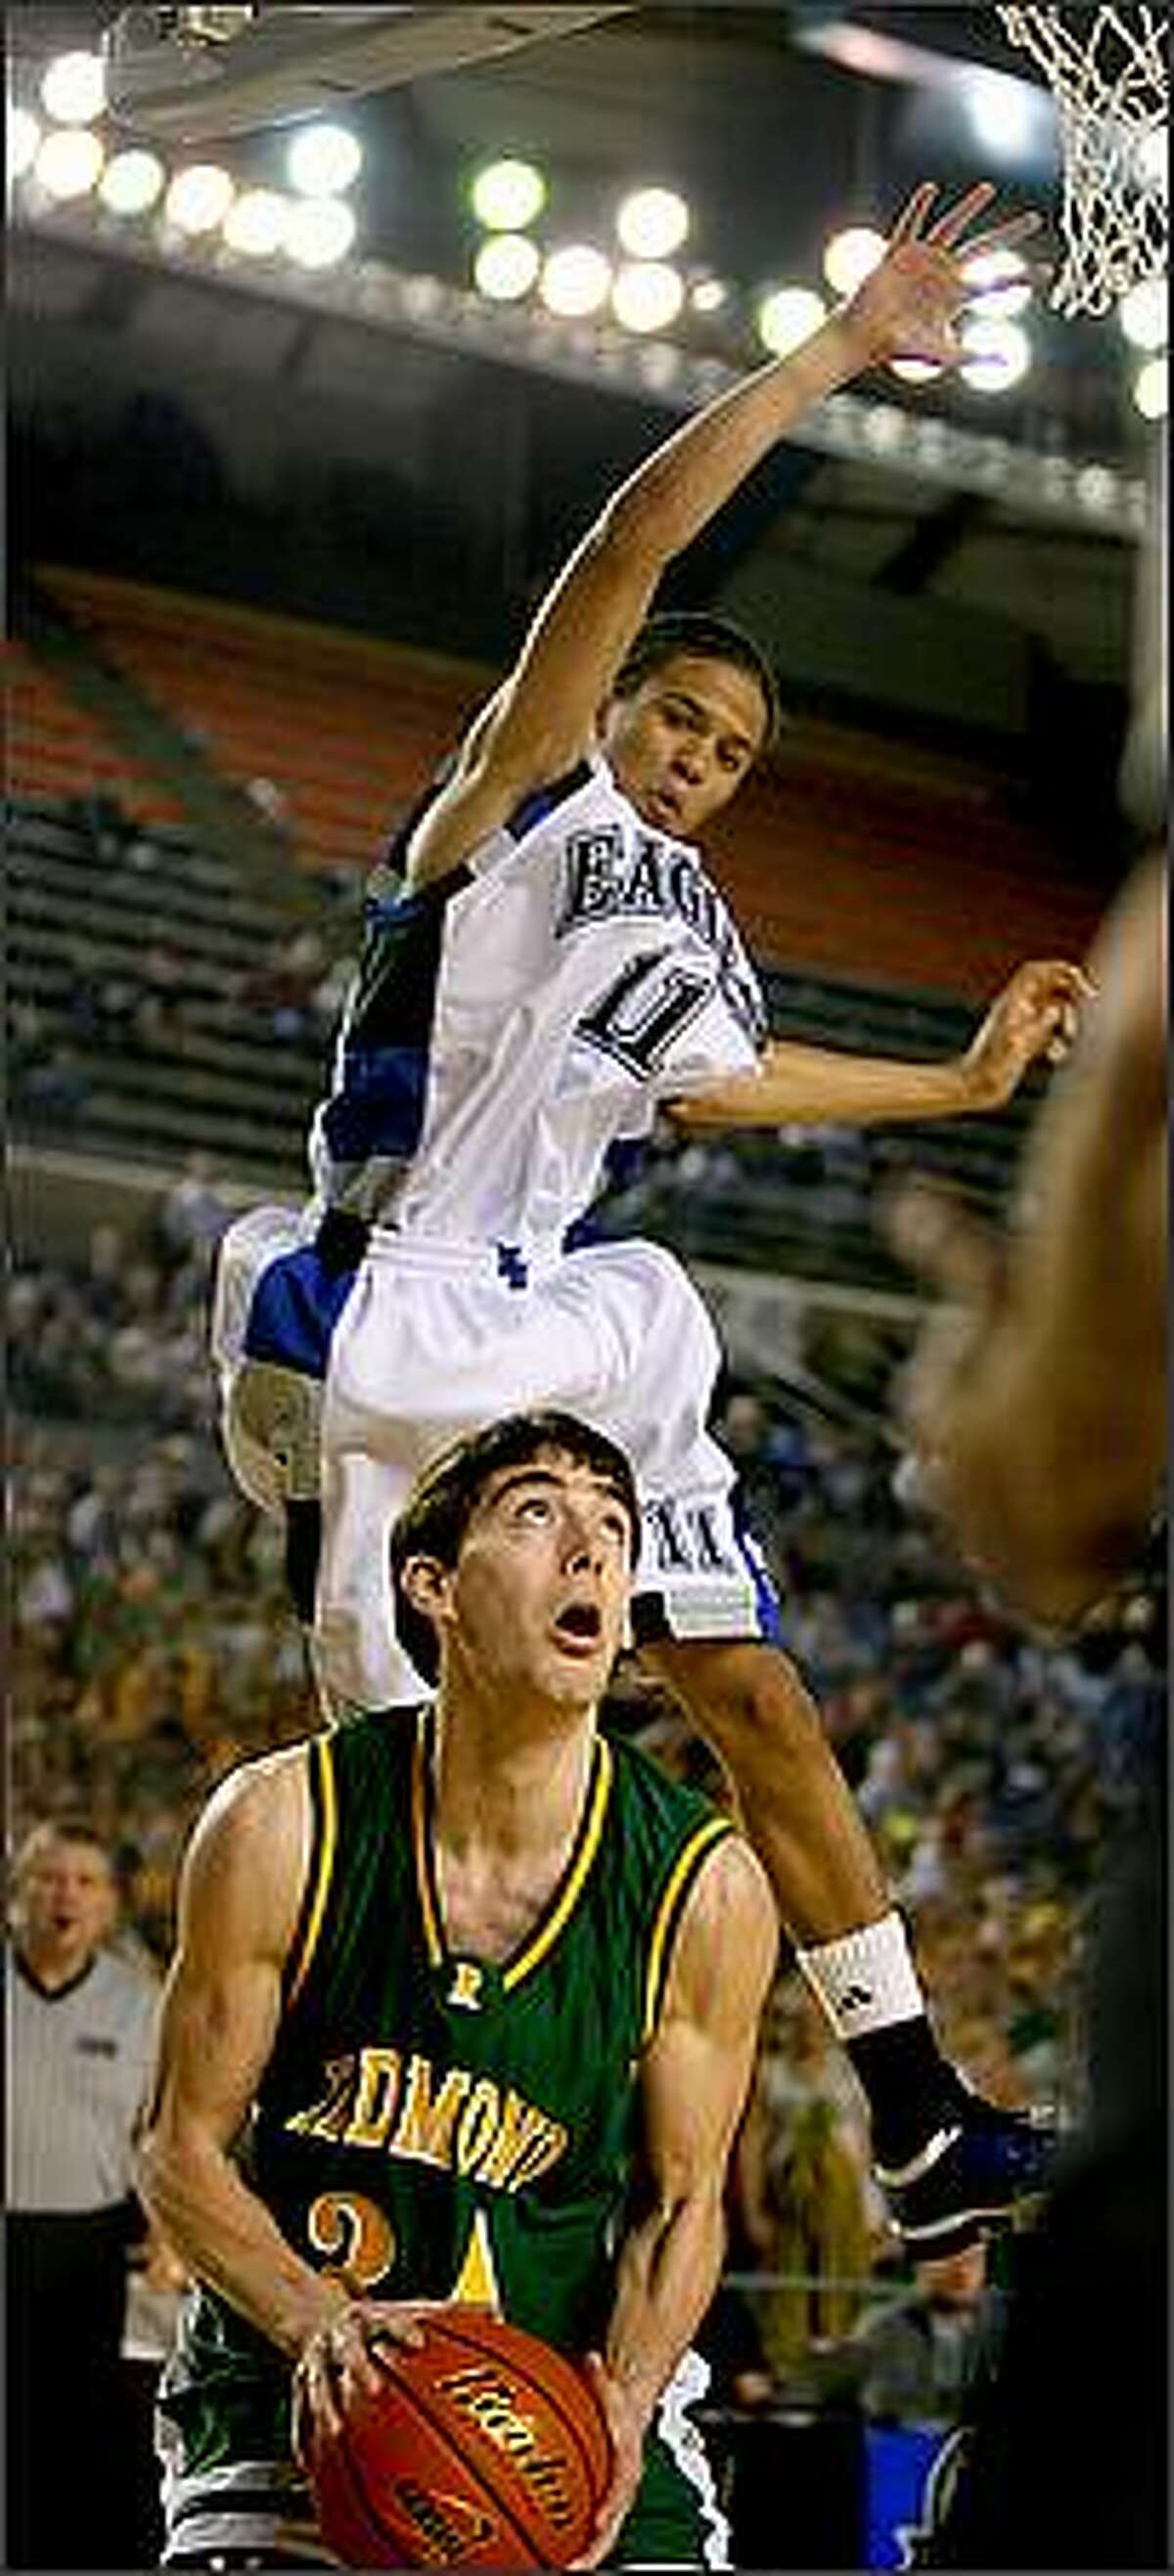 Federal Way's Michael Hale gets some elevation as he is faked by Redmond's Chad Hui-Peterson in the first quarter as Federal Way High School battles Redmond High School in the first round of the WIAA Boys' State Basketball Championships at the Tacoma Dome in Tacoma, Wash.